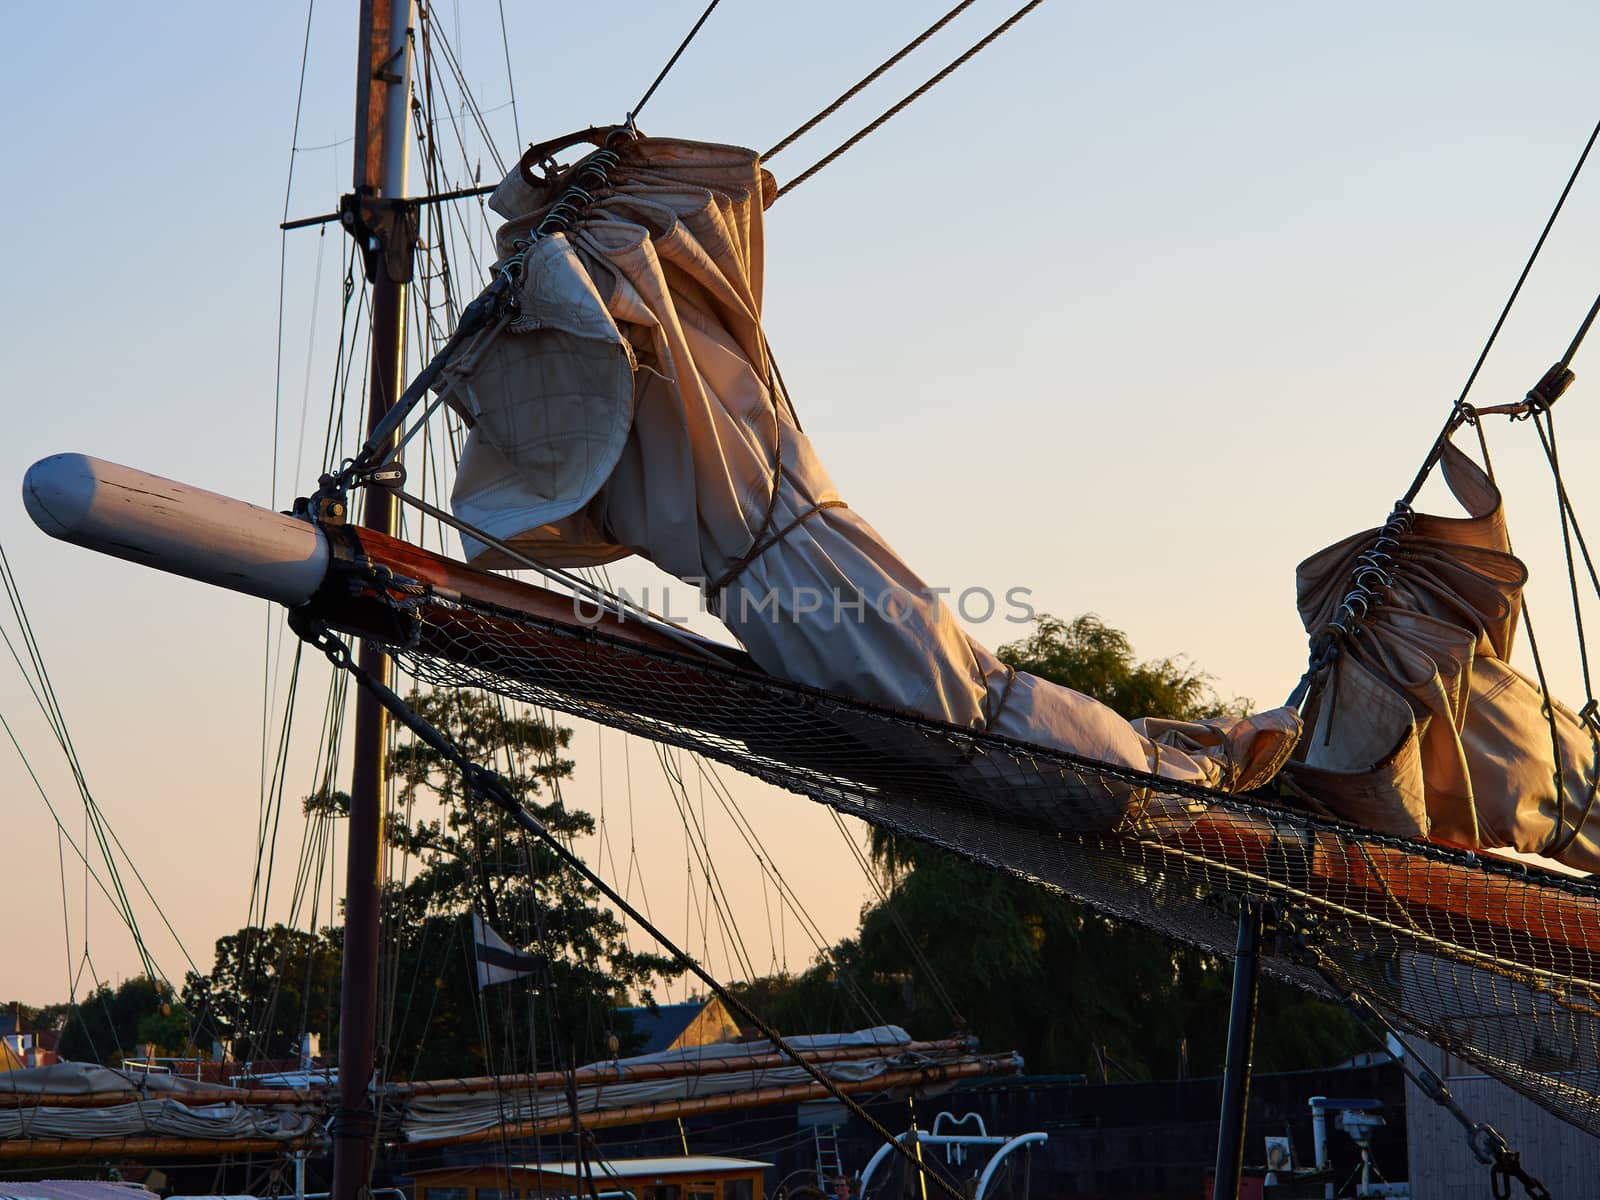 Bowsprit and gathered sail of a large classical traditional vintage tall sailing ship